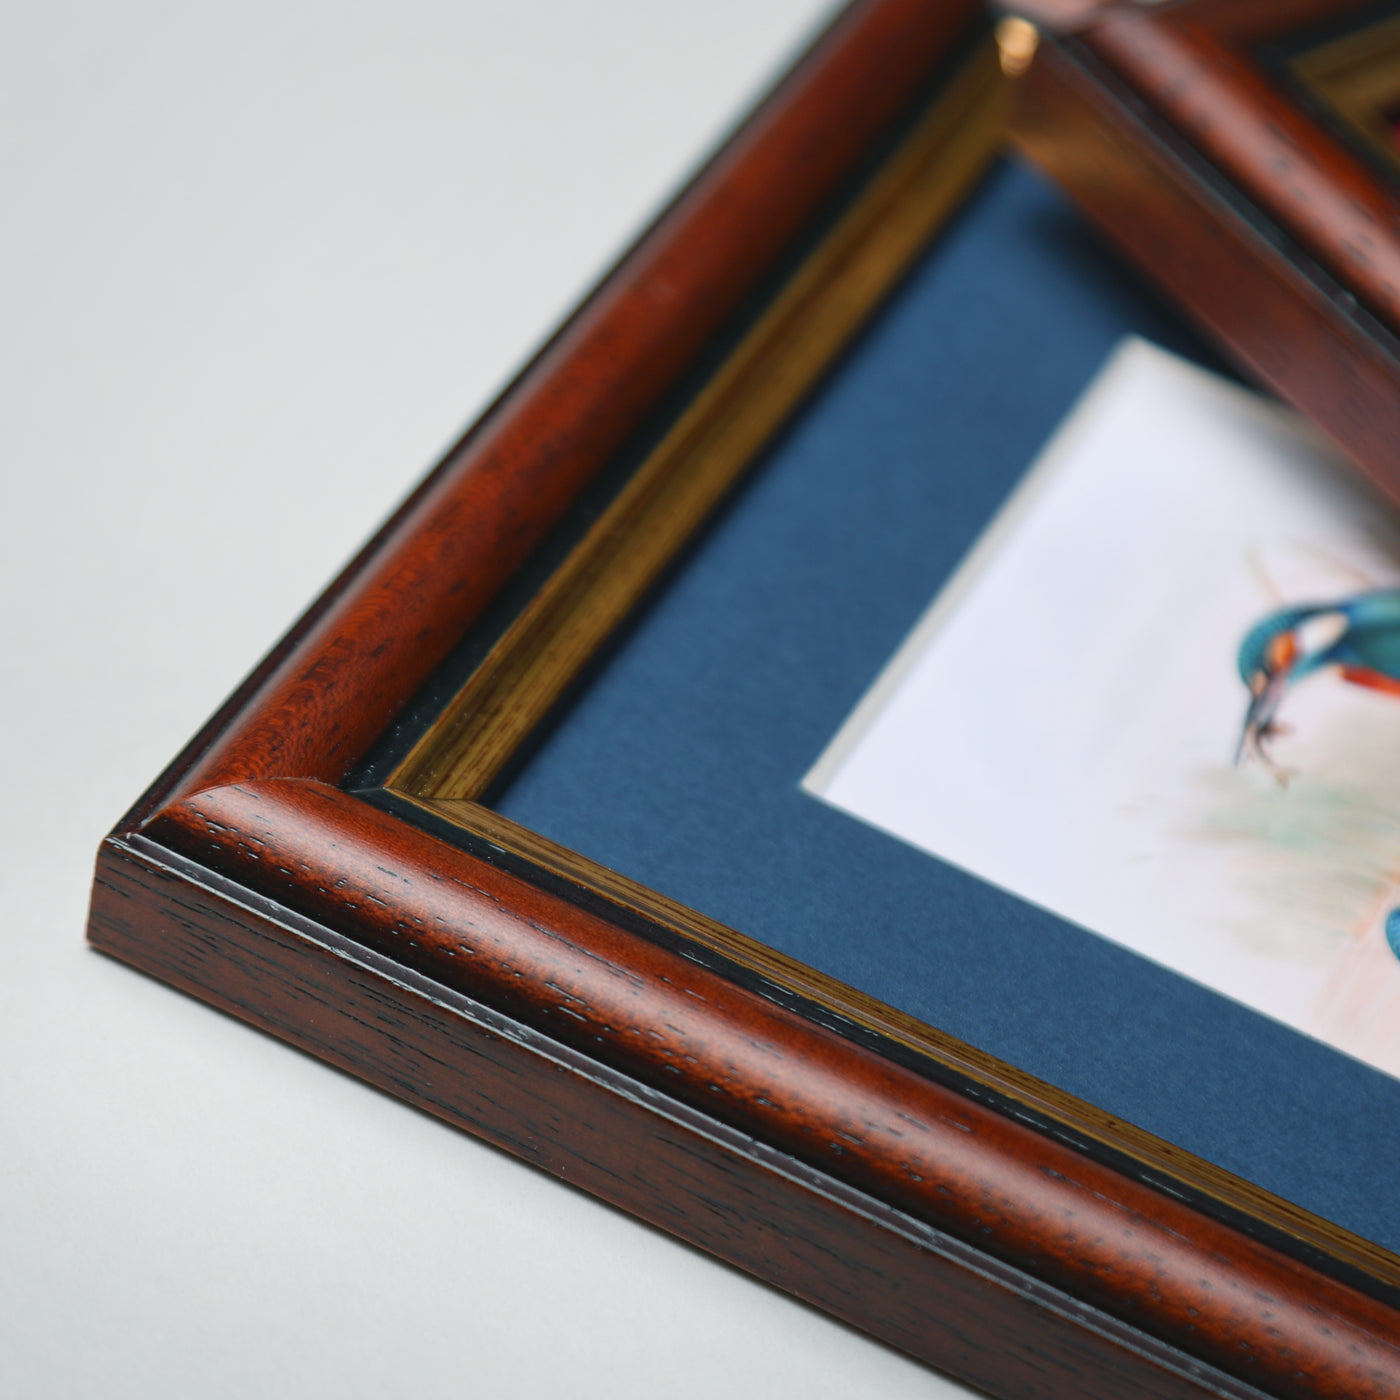 8x8 Brown & Gold Picture Frame with a 6x6 Mount